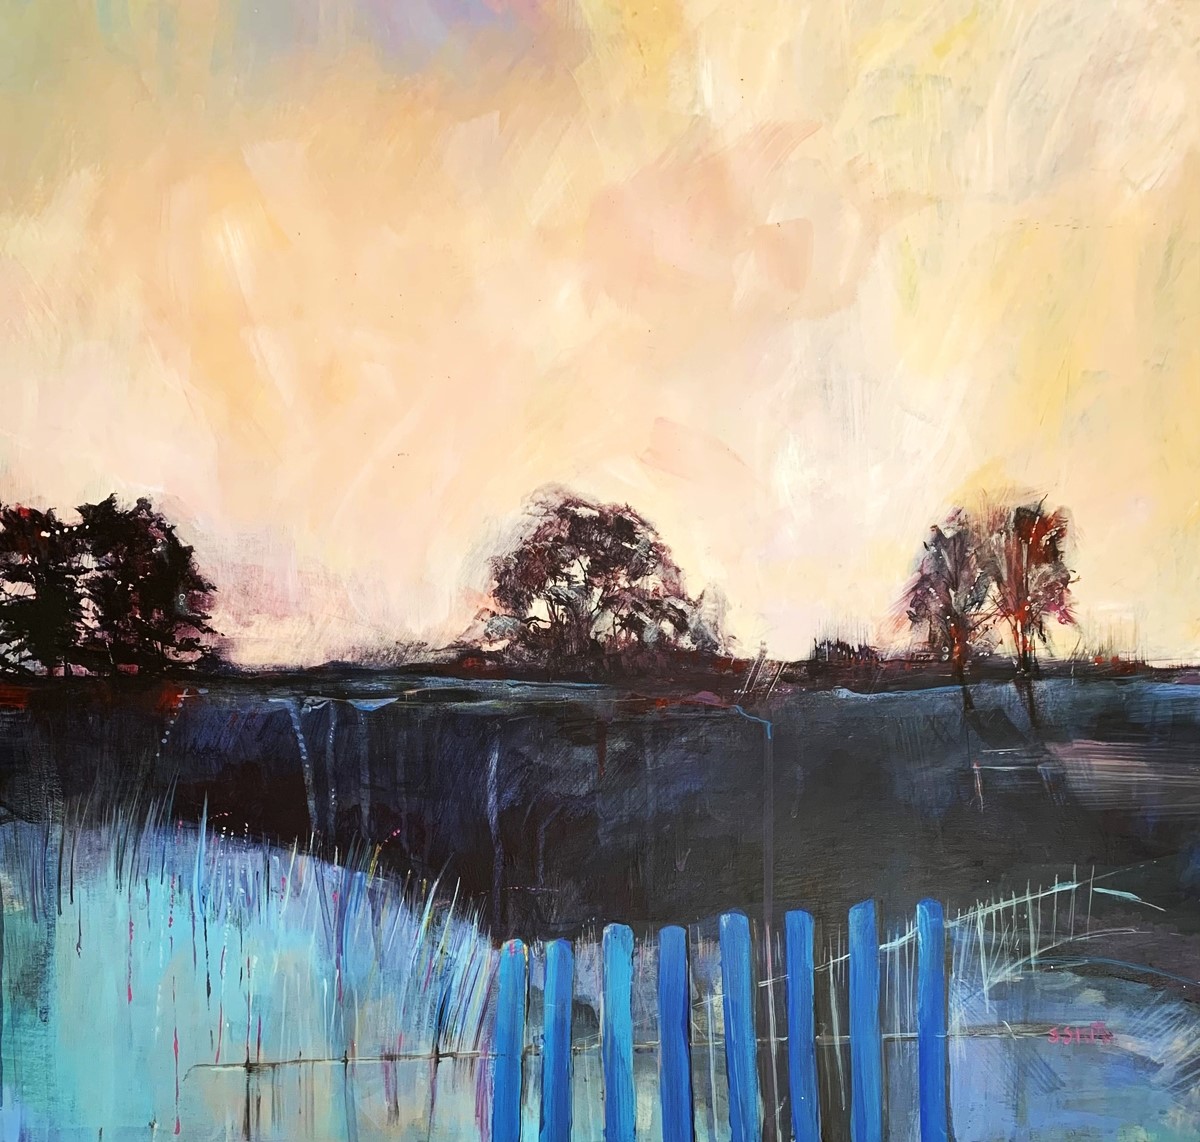 'Blue Fence' by artist Stephen Smith